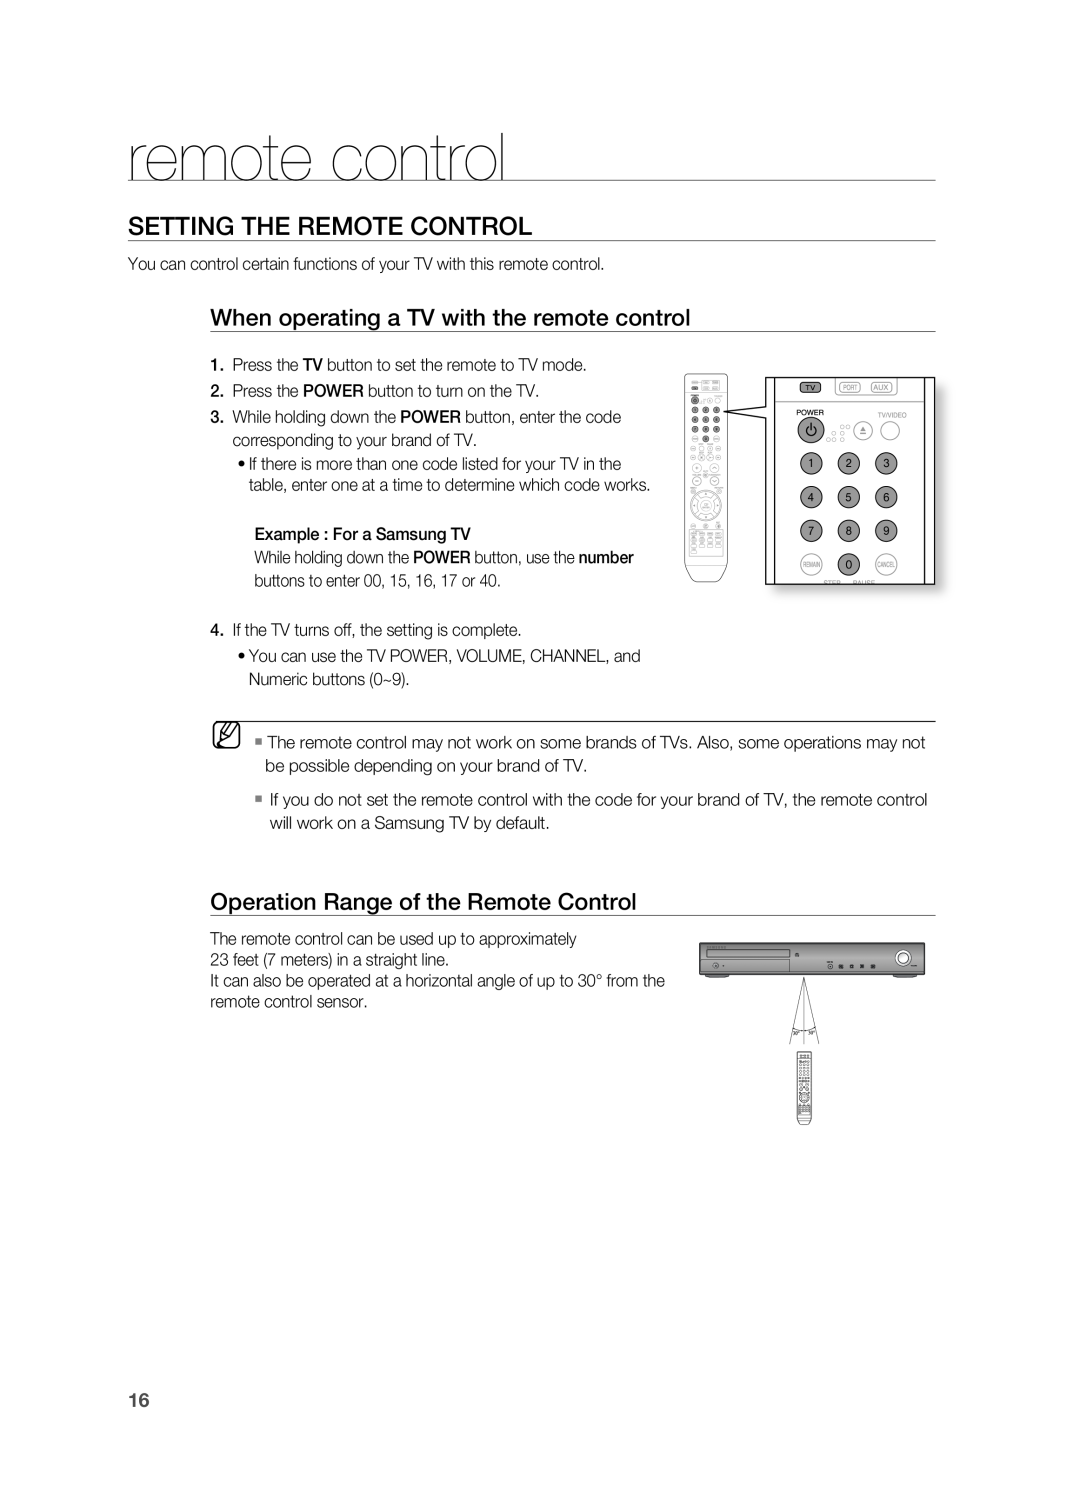 Samsung HT-TZ312, HT-Z310 manual SEttinG tHE rEmOtE COntrOL, When operating a tV with the remote control 